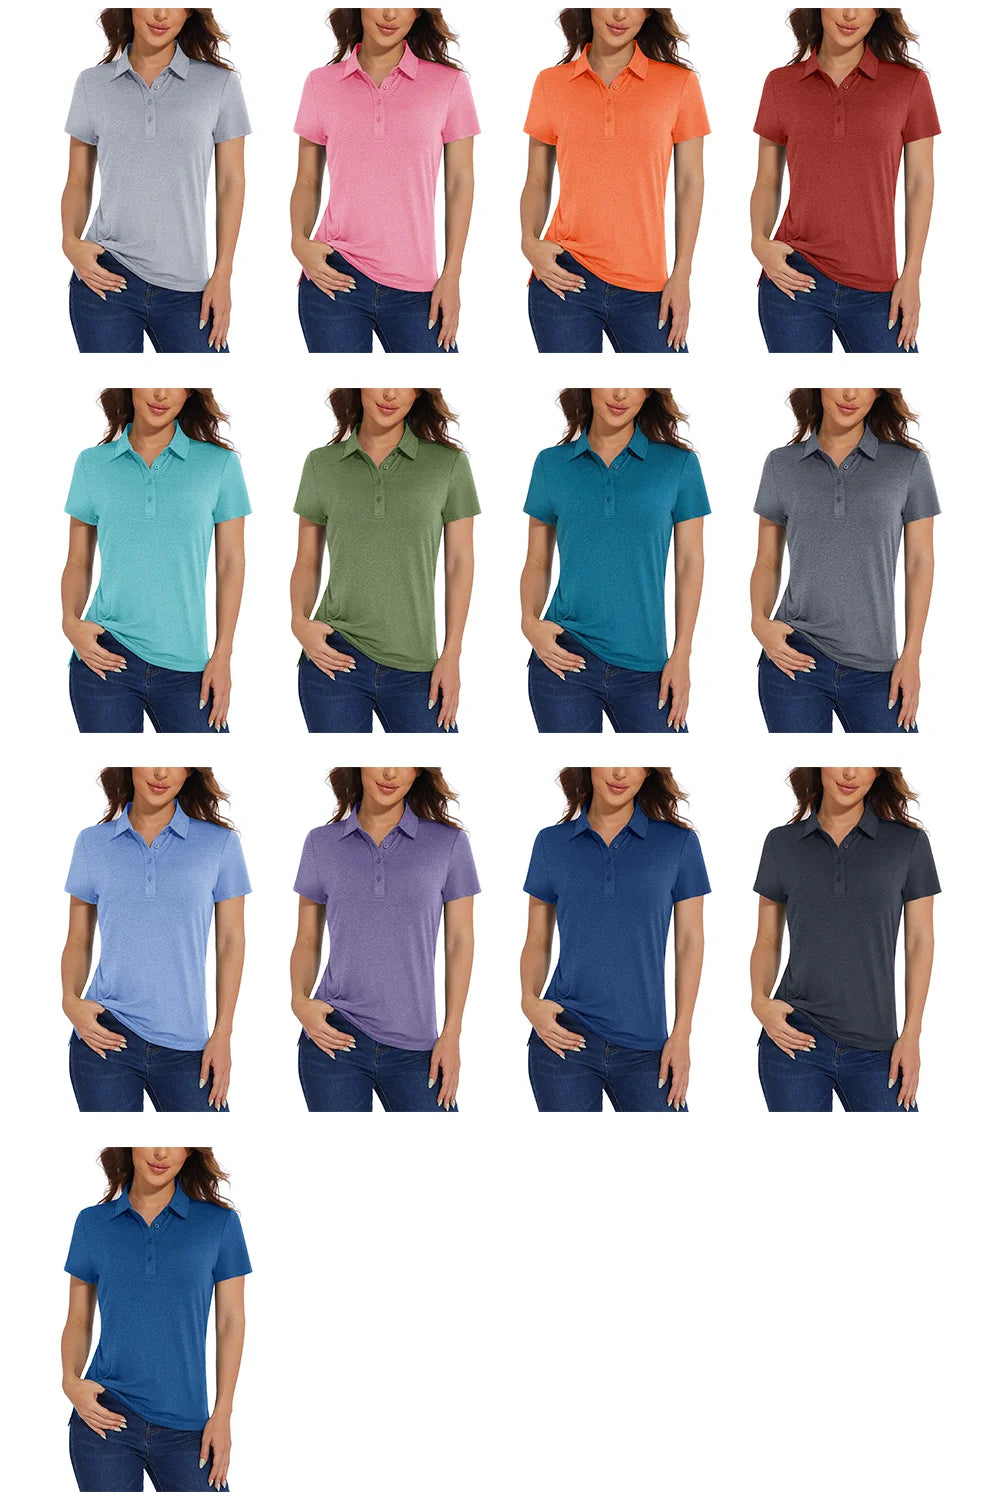 UPF 50+ Performance Polo Shirts Women's Quick Dry Short Sleeve T-shirts Athletic Tennis Golf Shirt Pullover Tops Polo